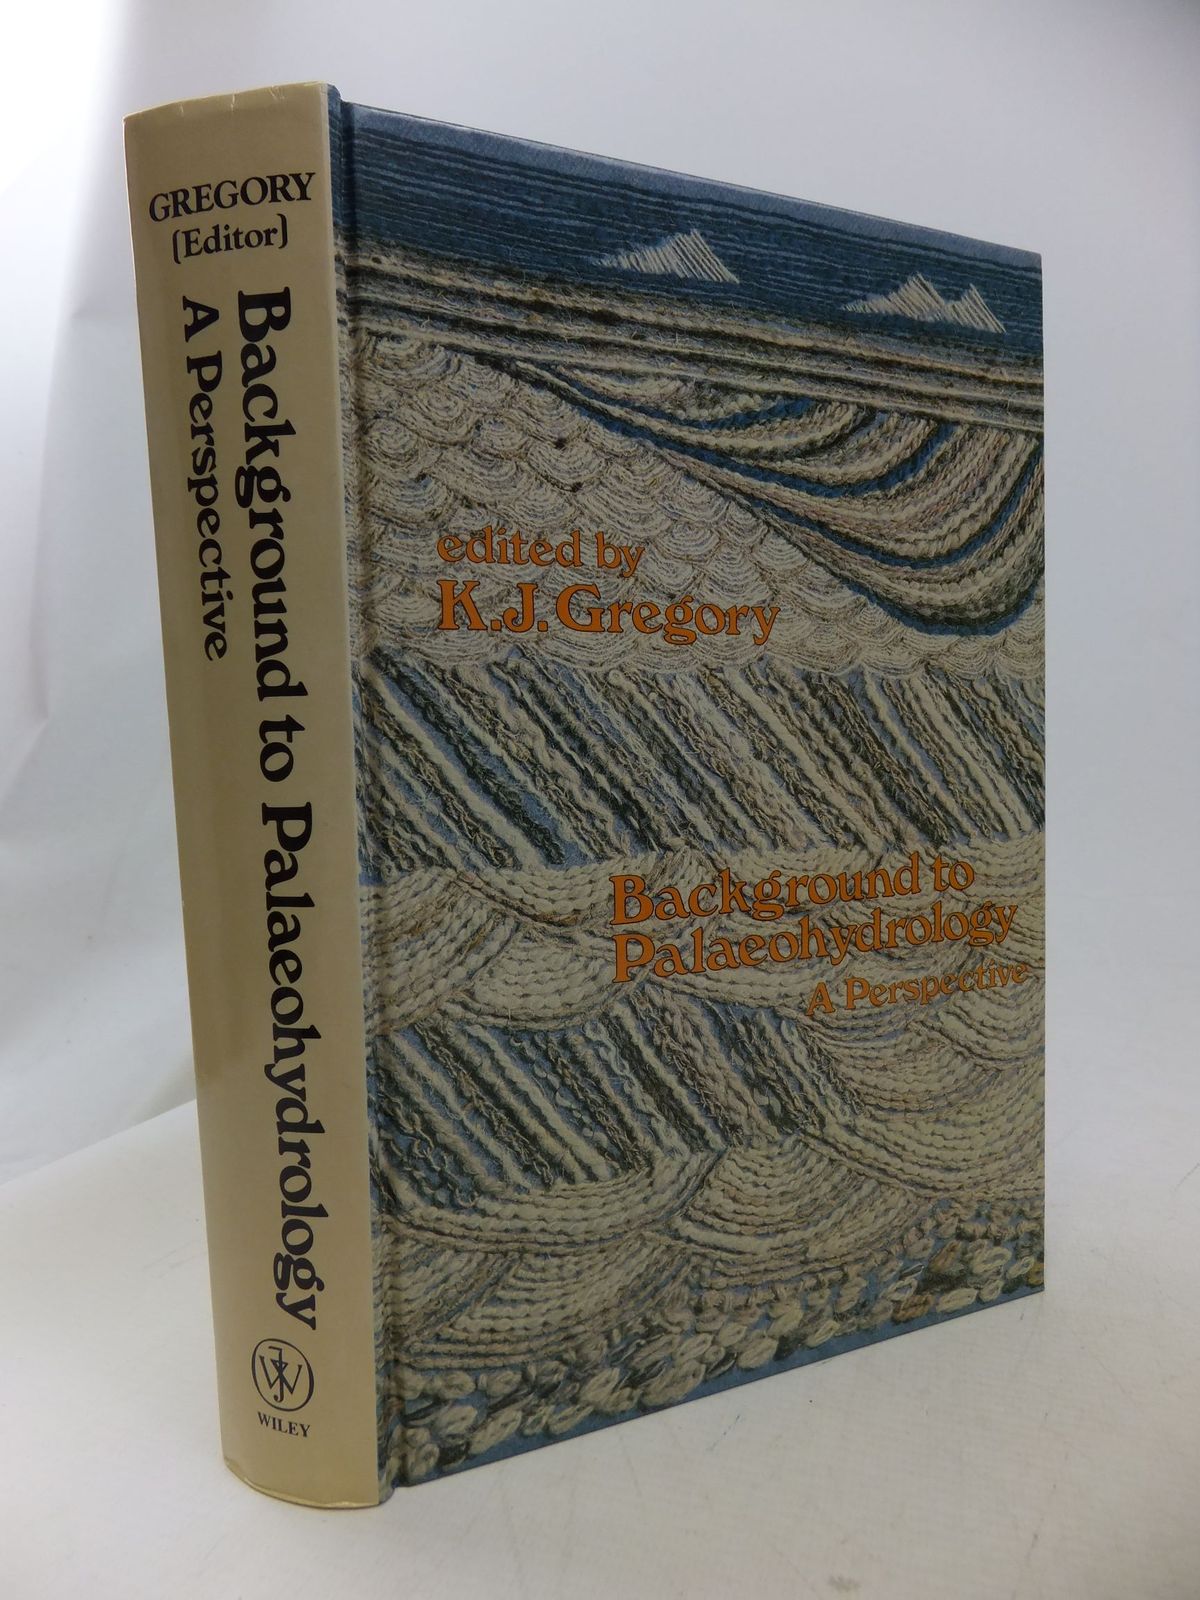 Photo of BACKGROUND TO PALAEOHYDROLOGY A PERSPECTIVE- Stock Number: 1710854